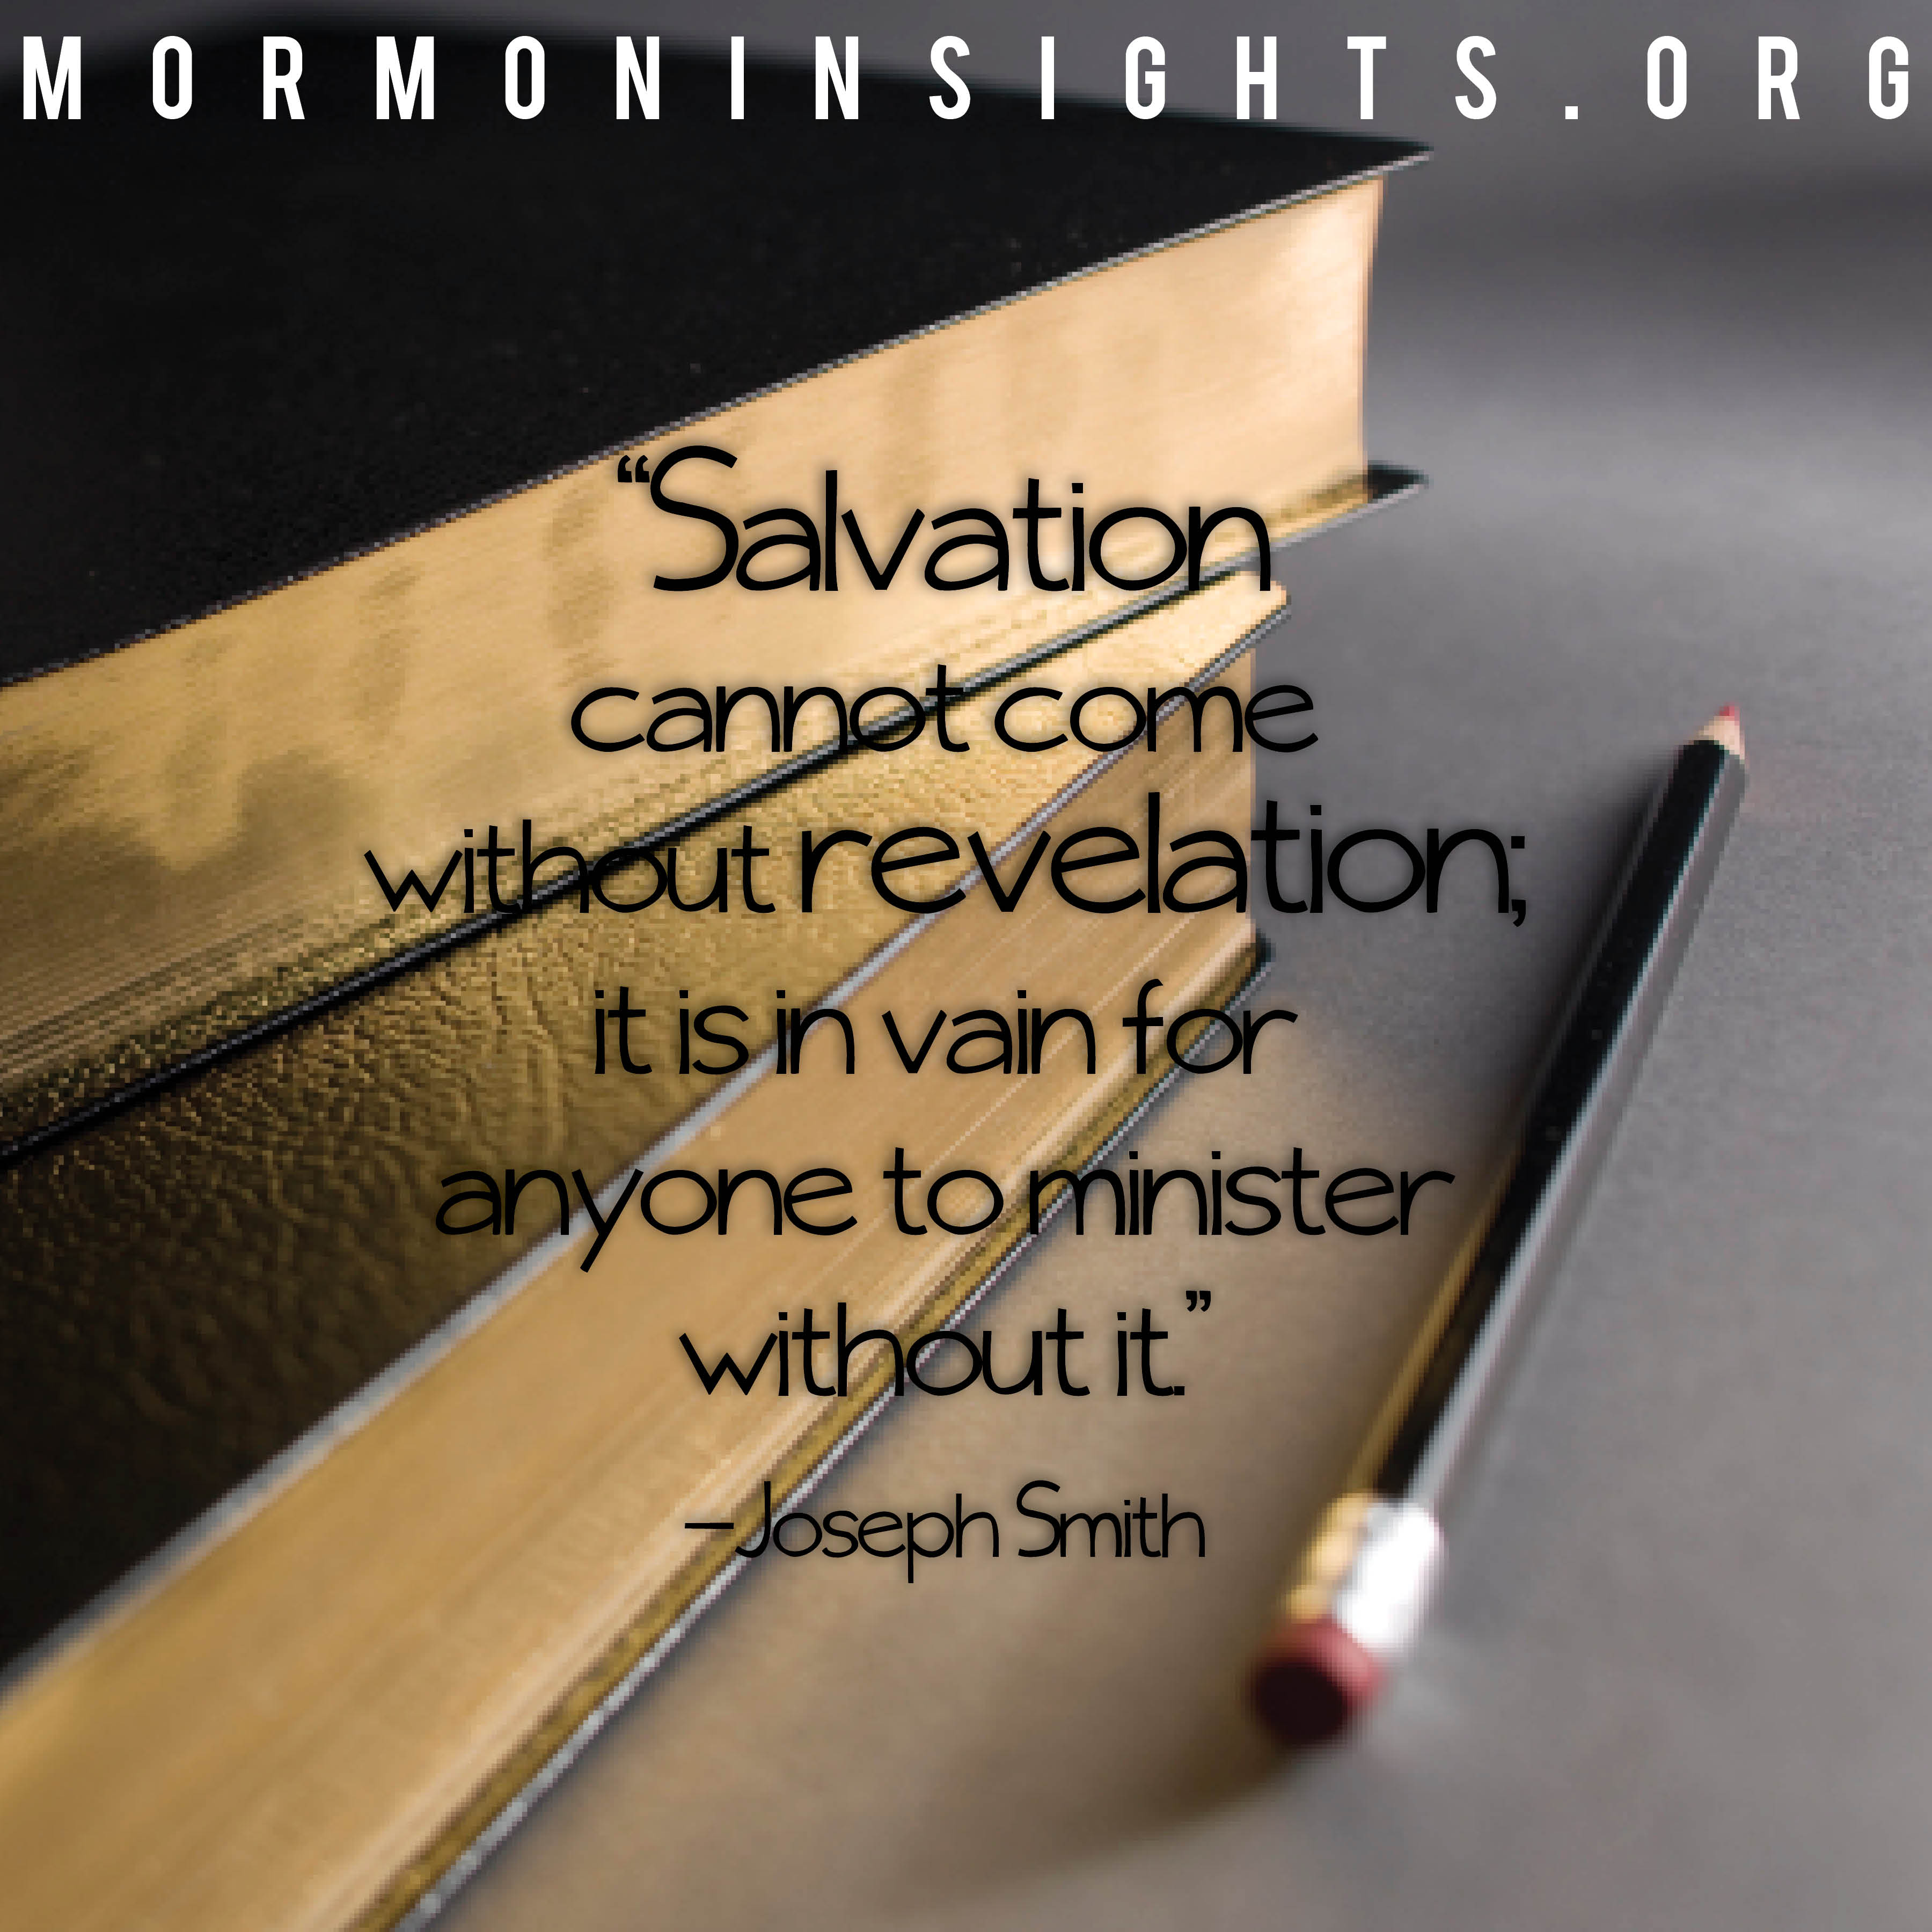 "Salvation cannot come without revelation; it is in vain for anyone to minister without it." - Joseph Smith